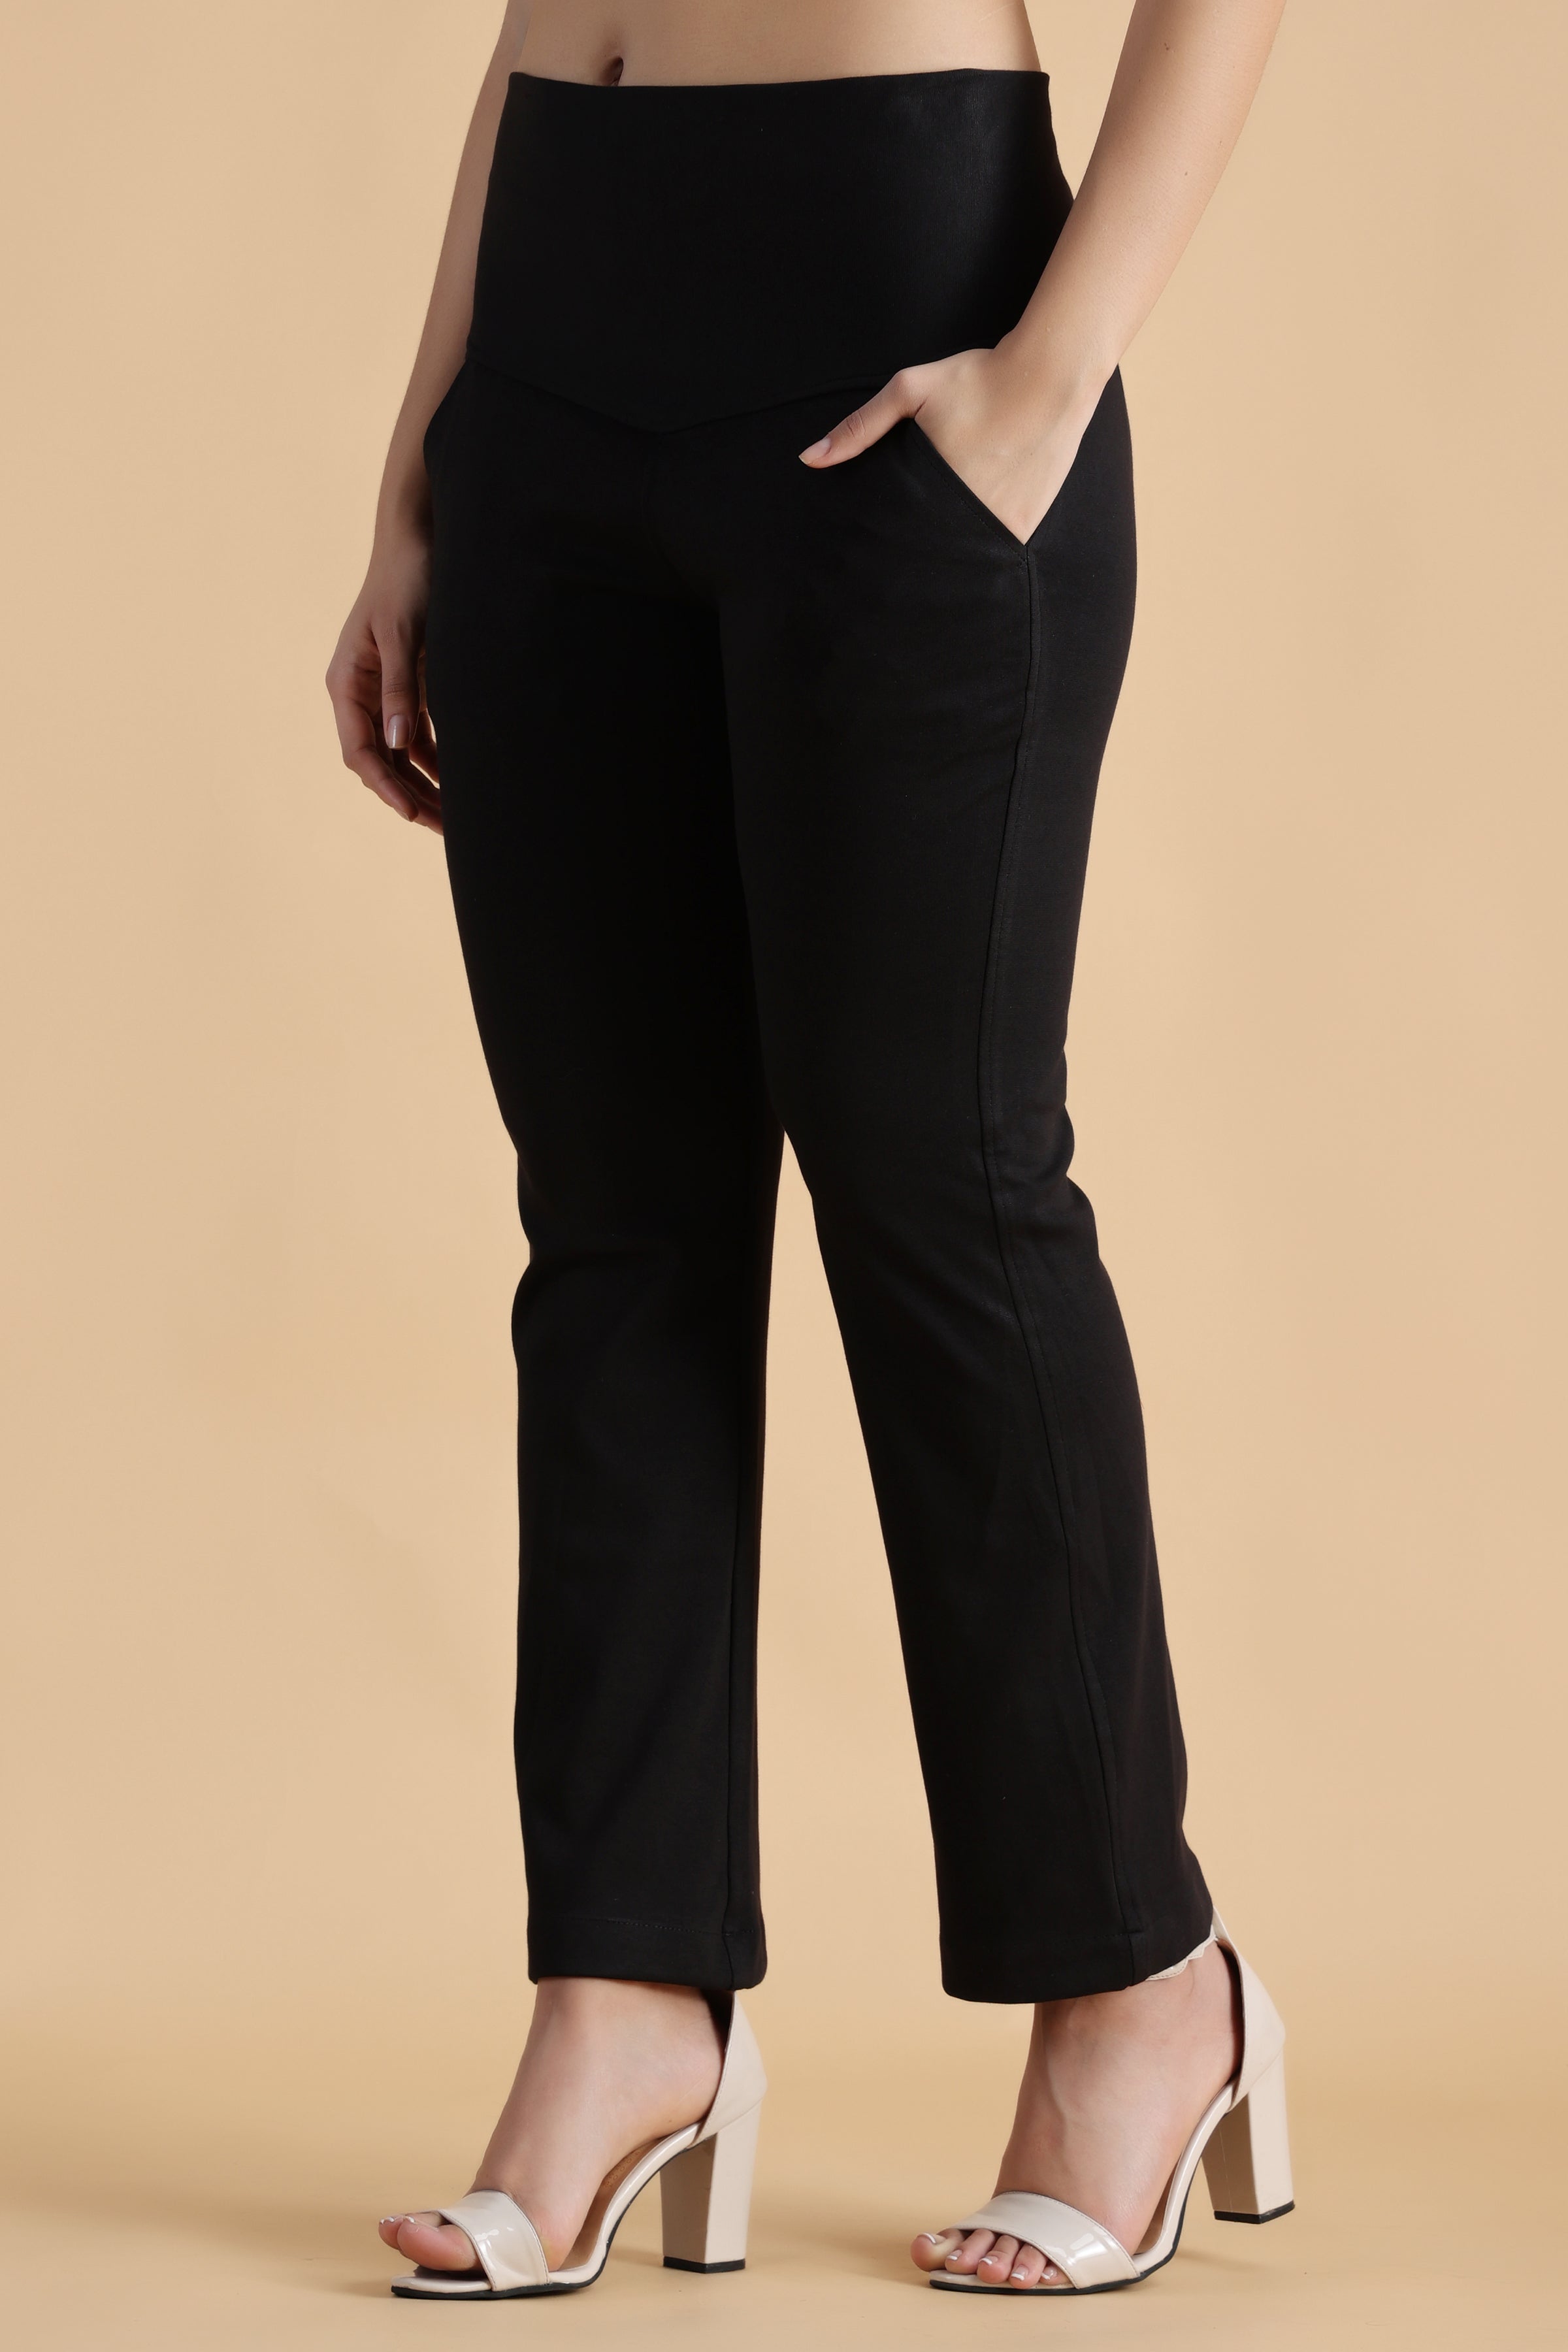 Buy Women's Wide Leg Jeans Casual High Waist Elasticity Denim Pants Elastic Waist  Palazzo Trousers KLGDA Black Online at Lowest Price Ever in India | Check  Reviews & Ratings - Shop The World